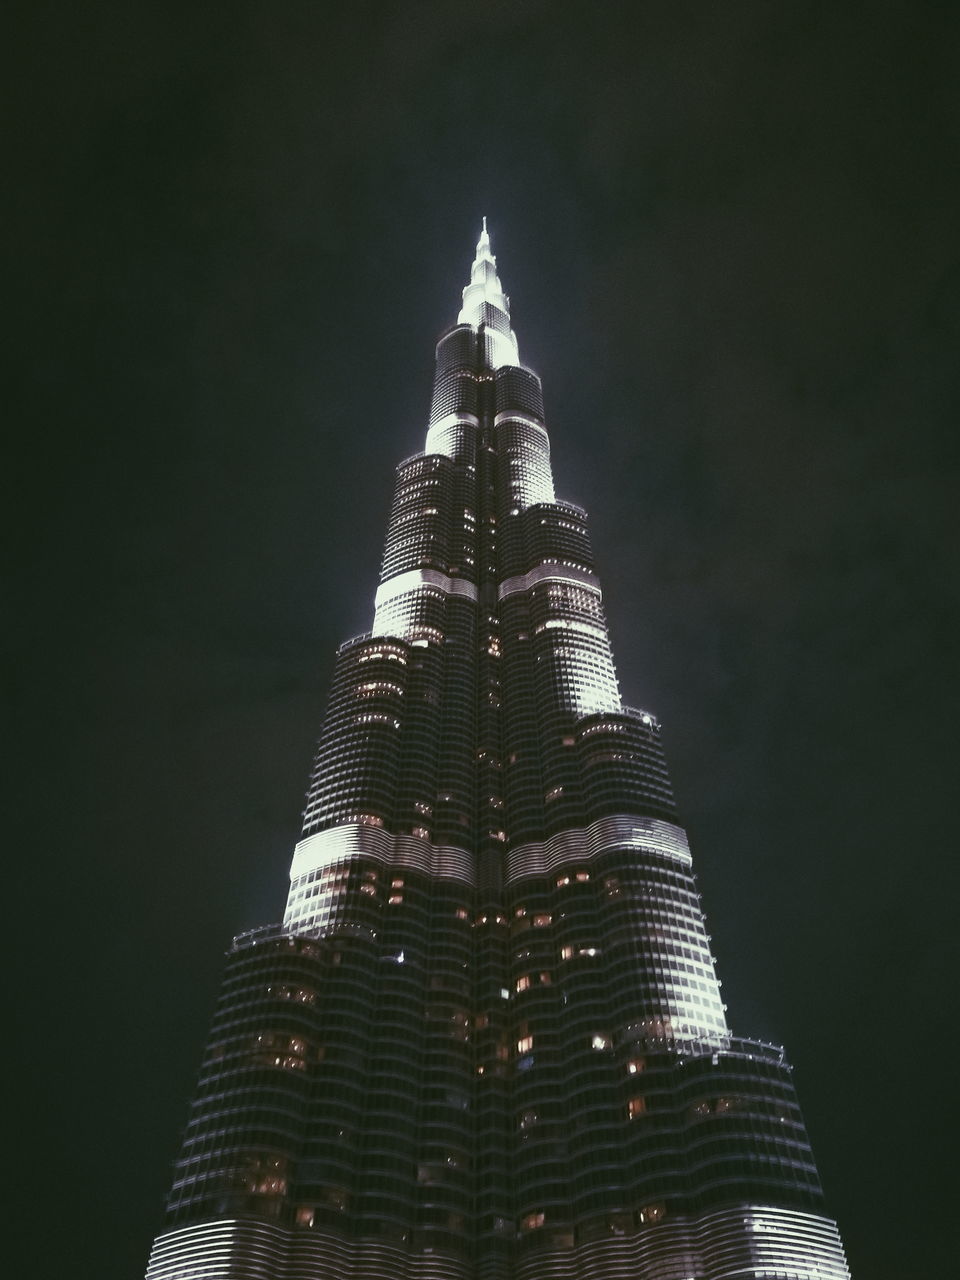 building exterior, built structure, architecture, tall - high, building, low angle view, office building exterior, skyscraper, tower, night, no people, travel destinations, sky, illuminated, city, nature, tourism, modern, travel, outdoors, spire, financial district, place of worship